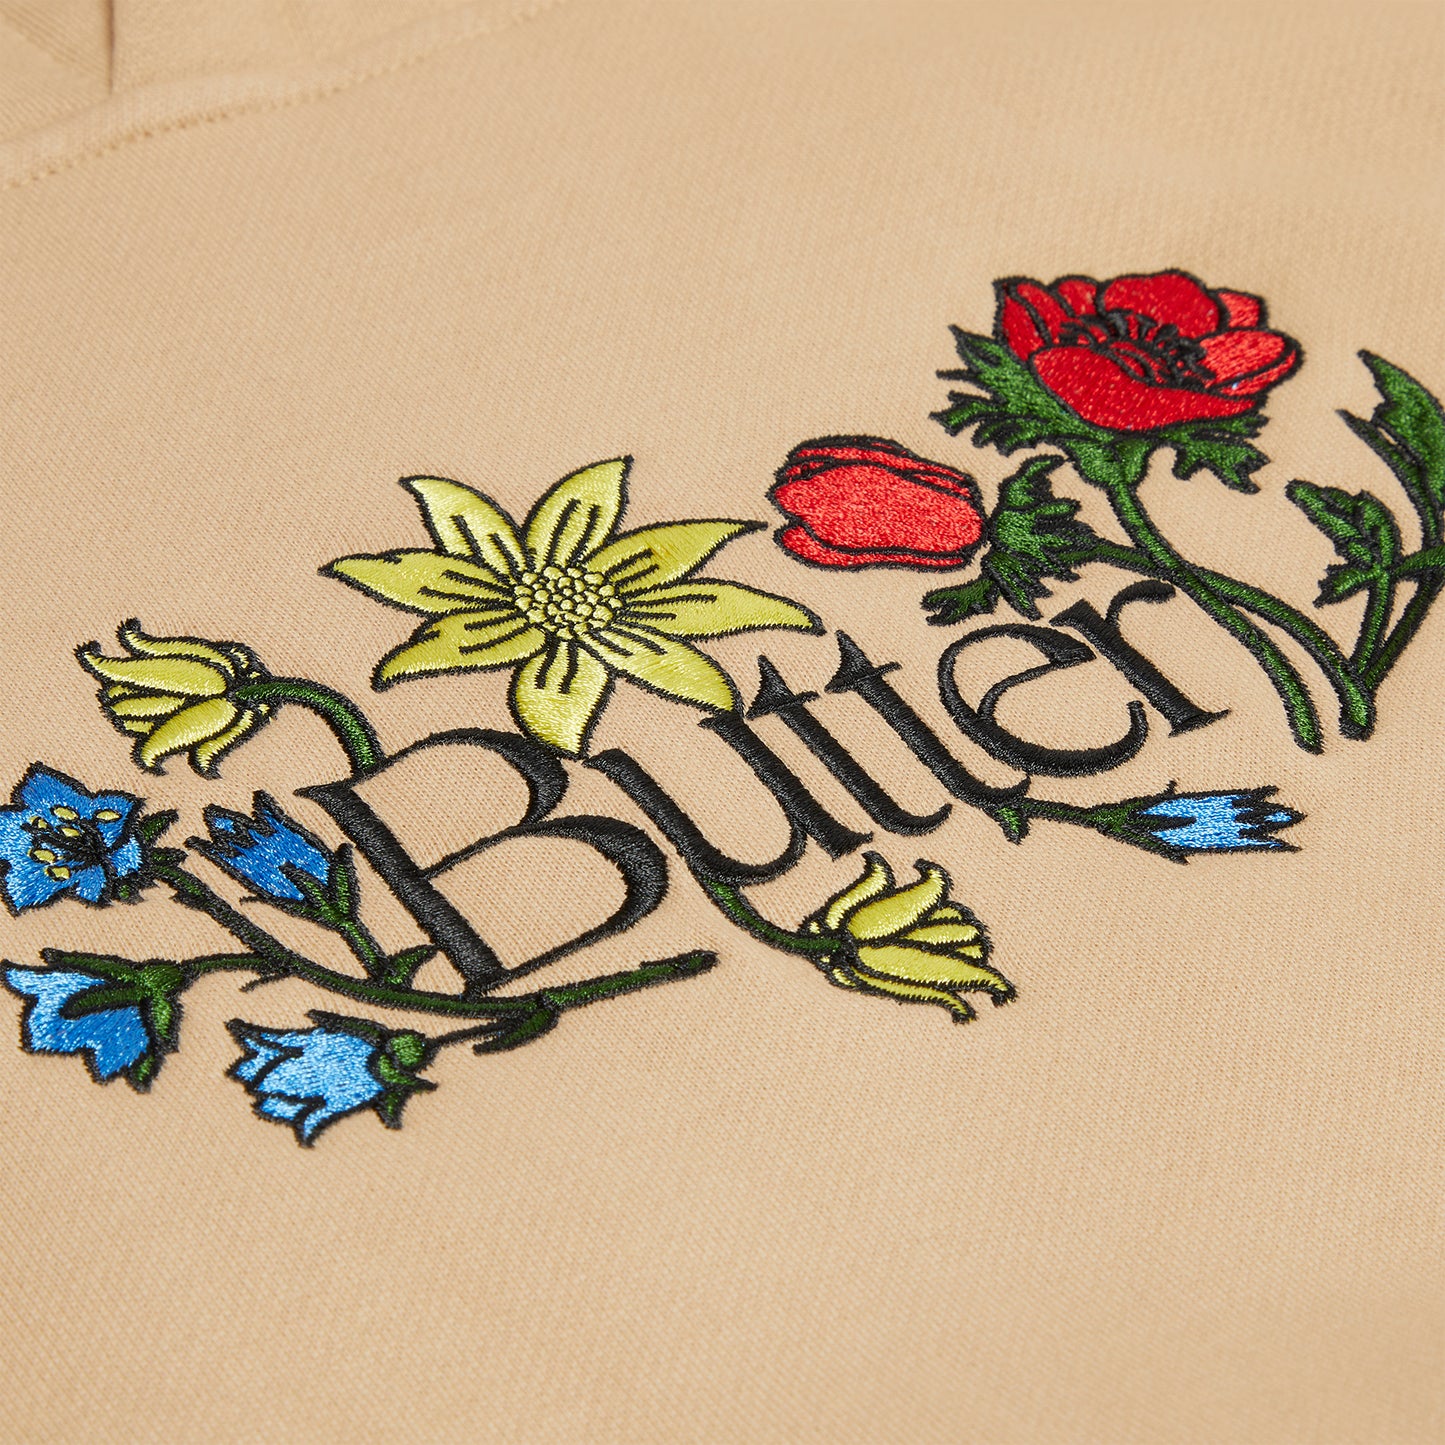 Butter Goods Floral Embroidered Pullover Hood (Tan)